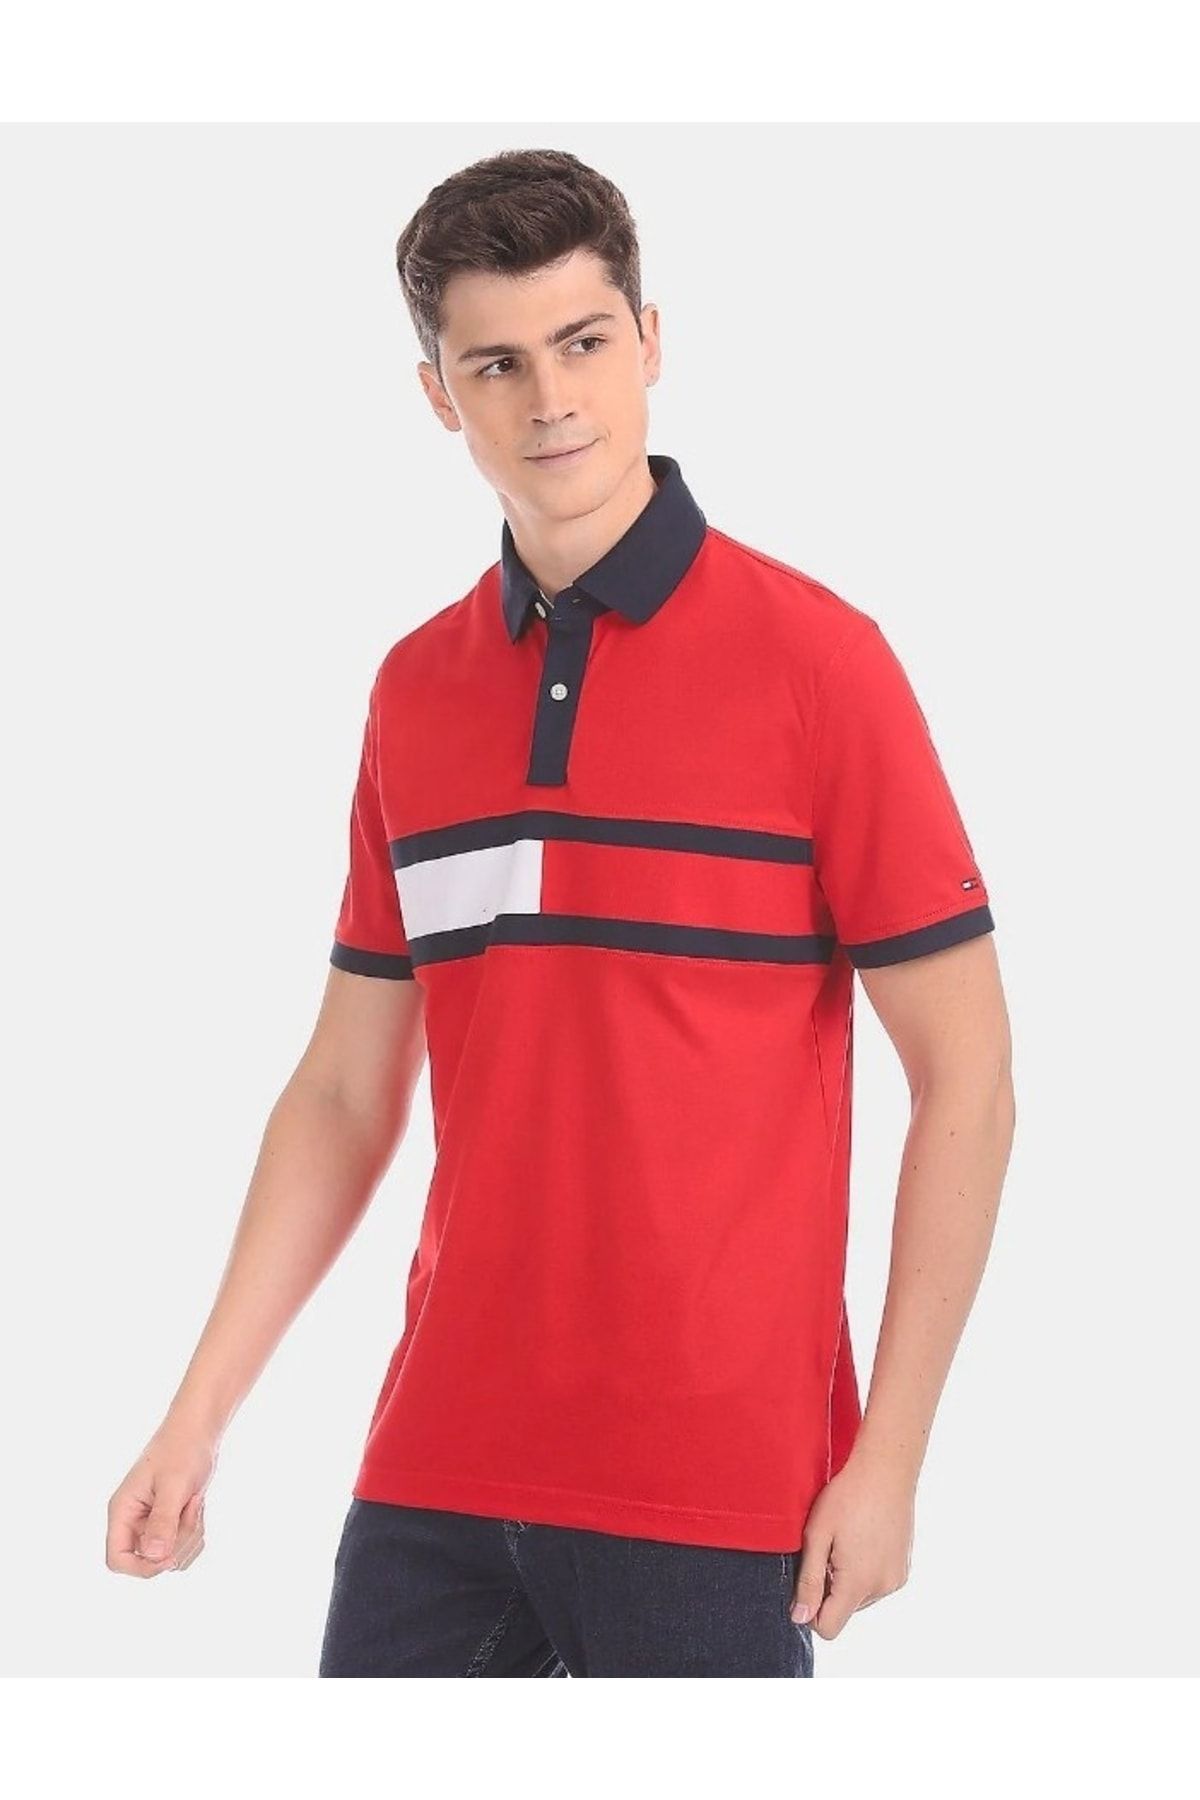 Tommy Hilfiger mens Short Sleeve Cotton Pique Flag in Custom Fit Polo Shirt,  Apple Red, X-Small US at  Men's Clothing store